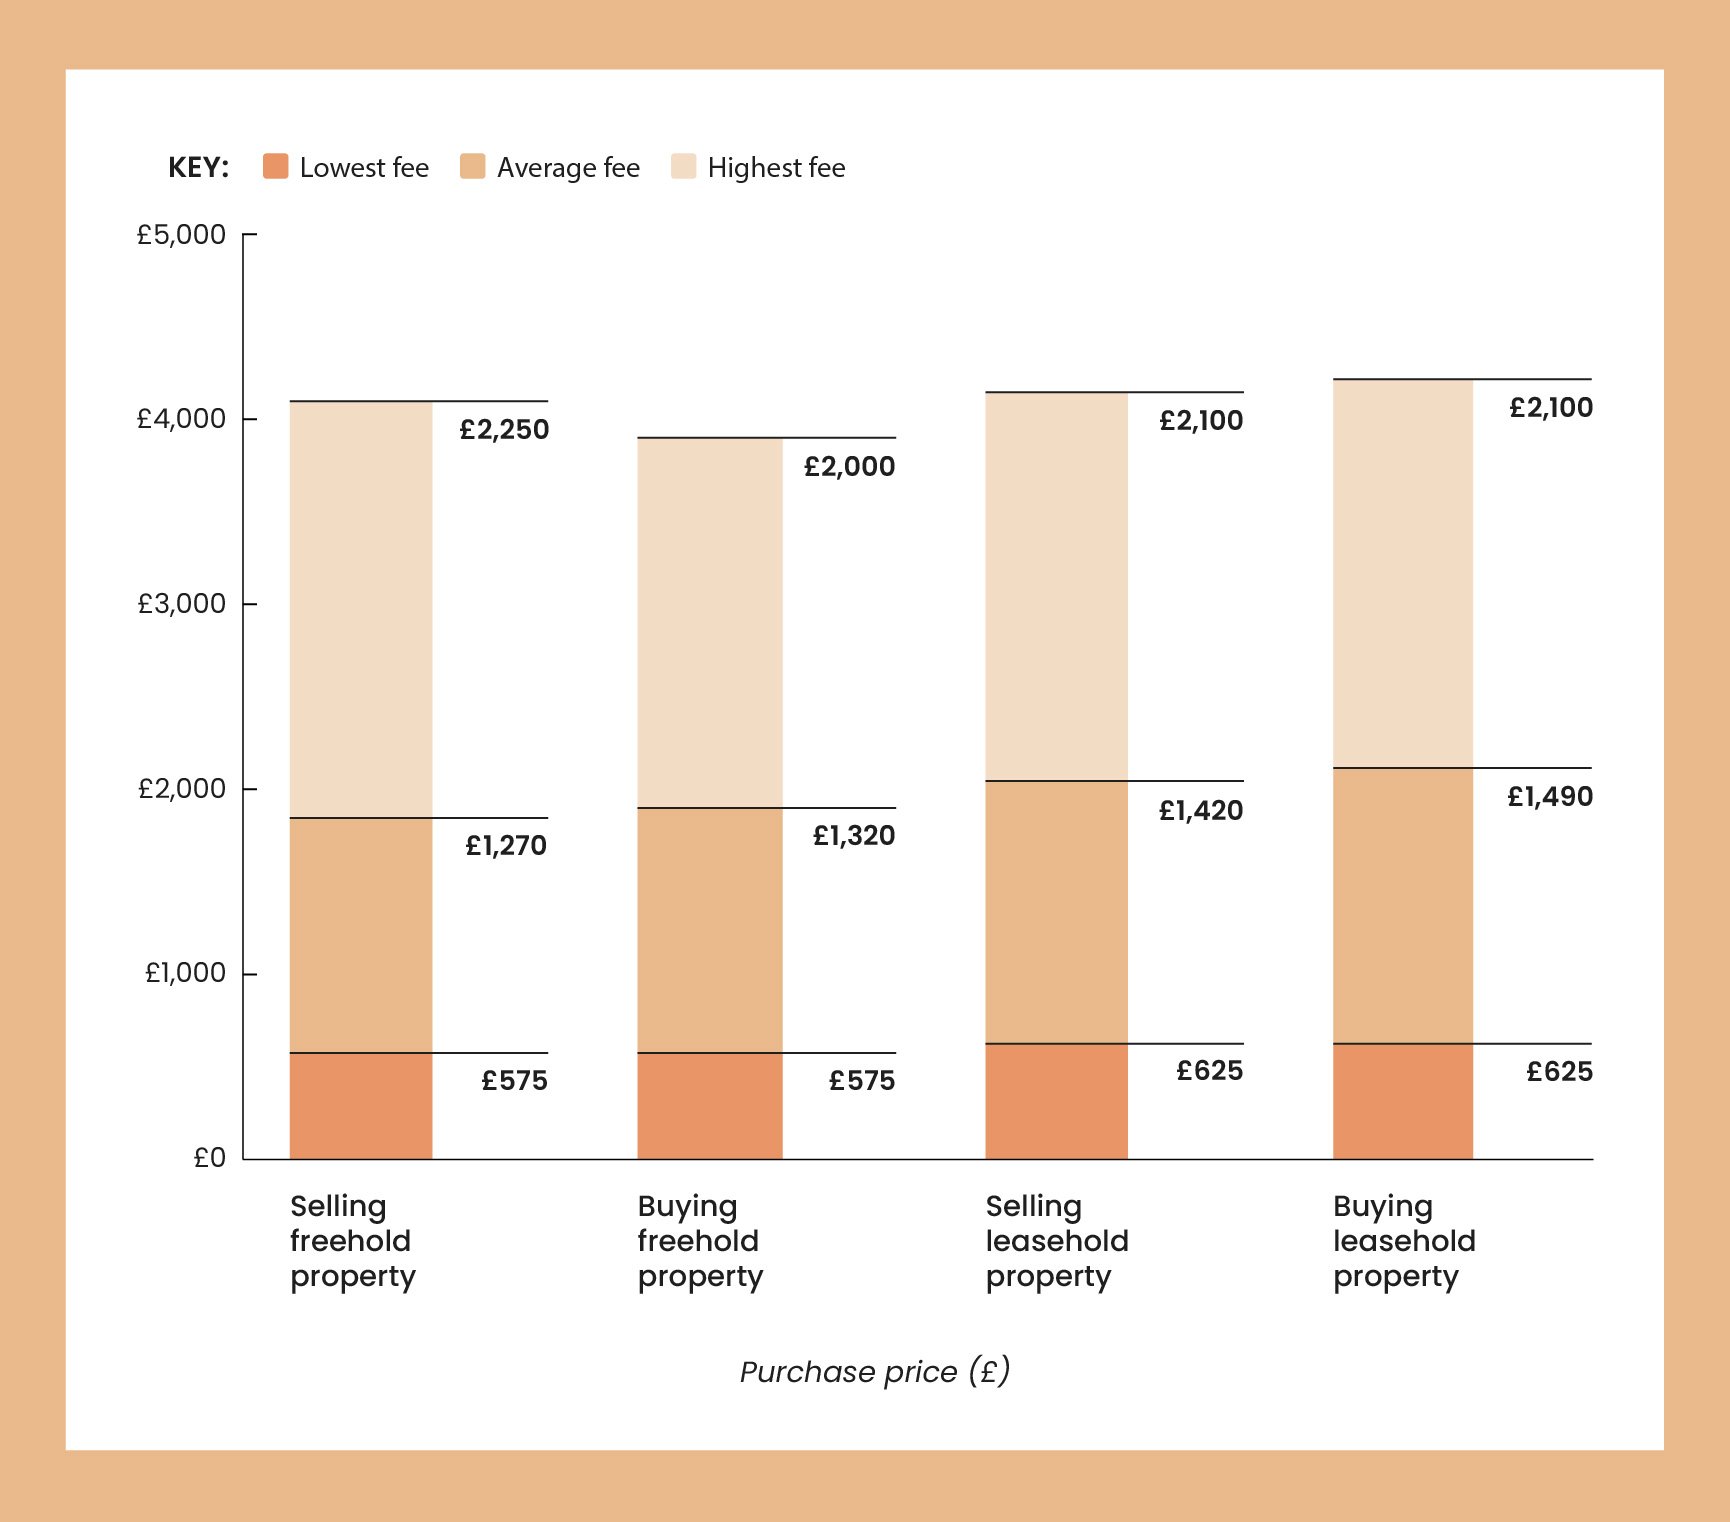 A light orange bar chart showing average conveyancing fees for buyers and sellers in the UK